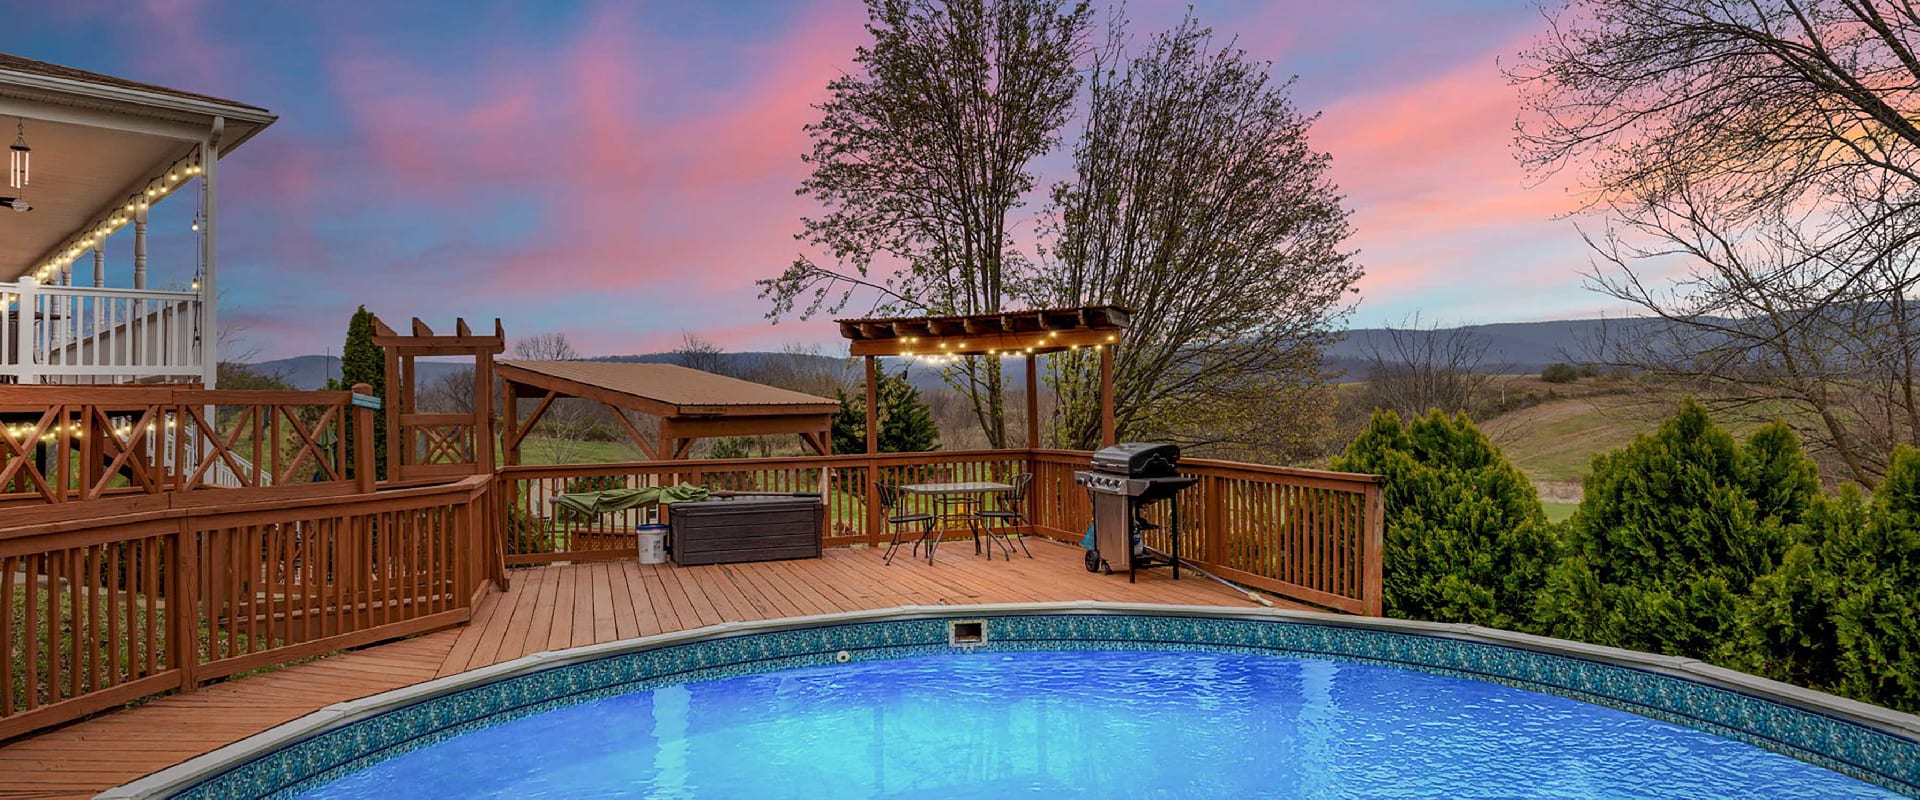 Large deck and outdoor pool overlooks the Virginia mountains at sunset